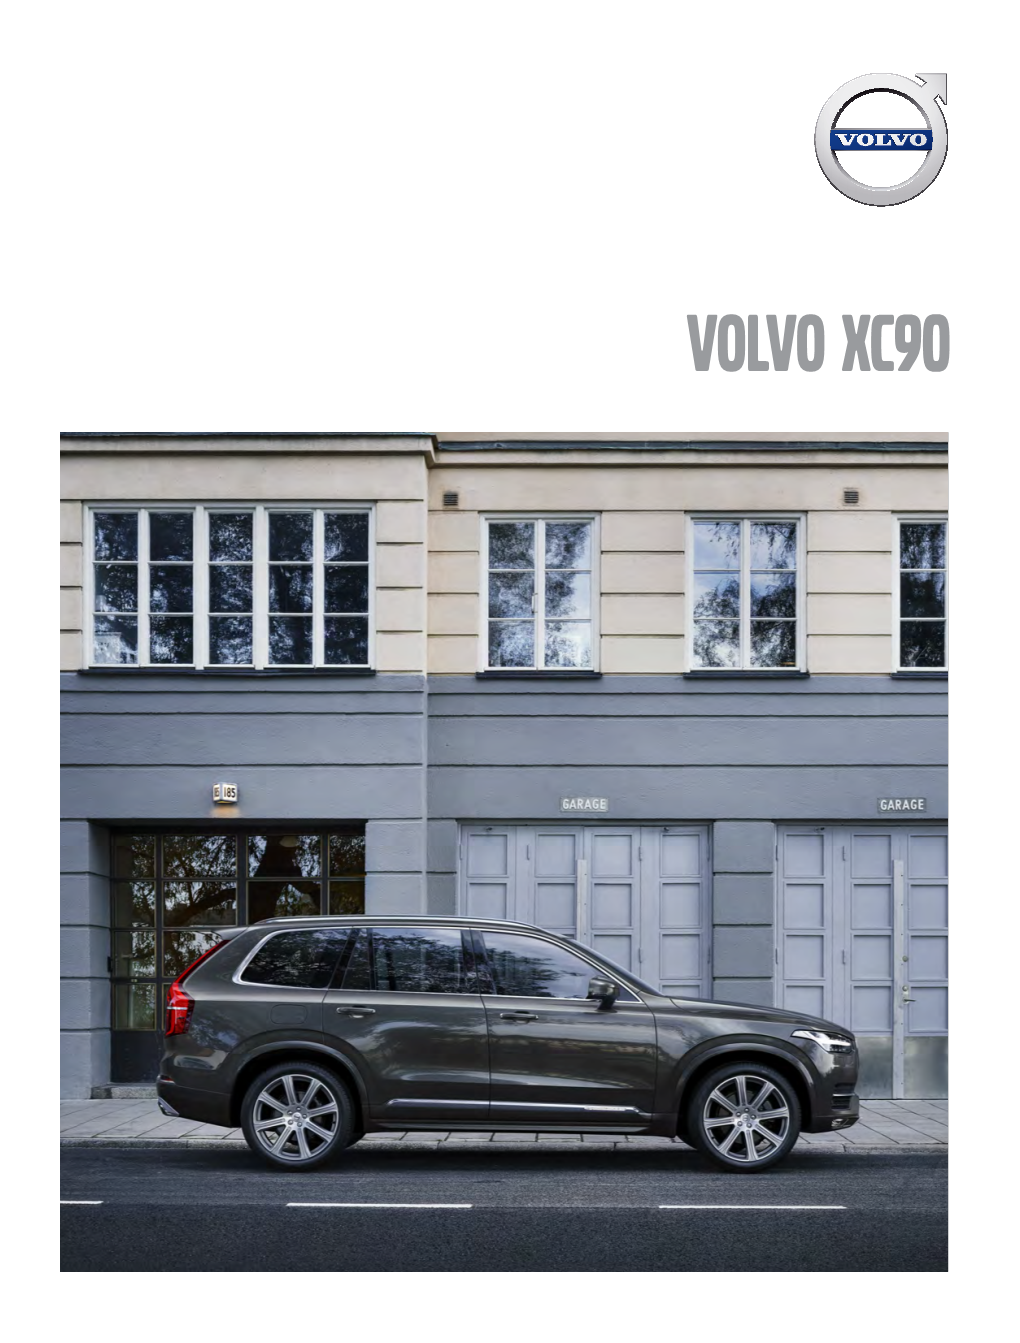 Travel First Class in the Volvo Xc90